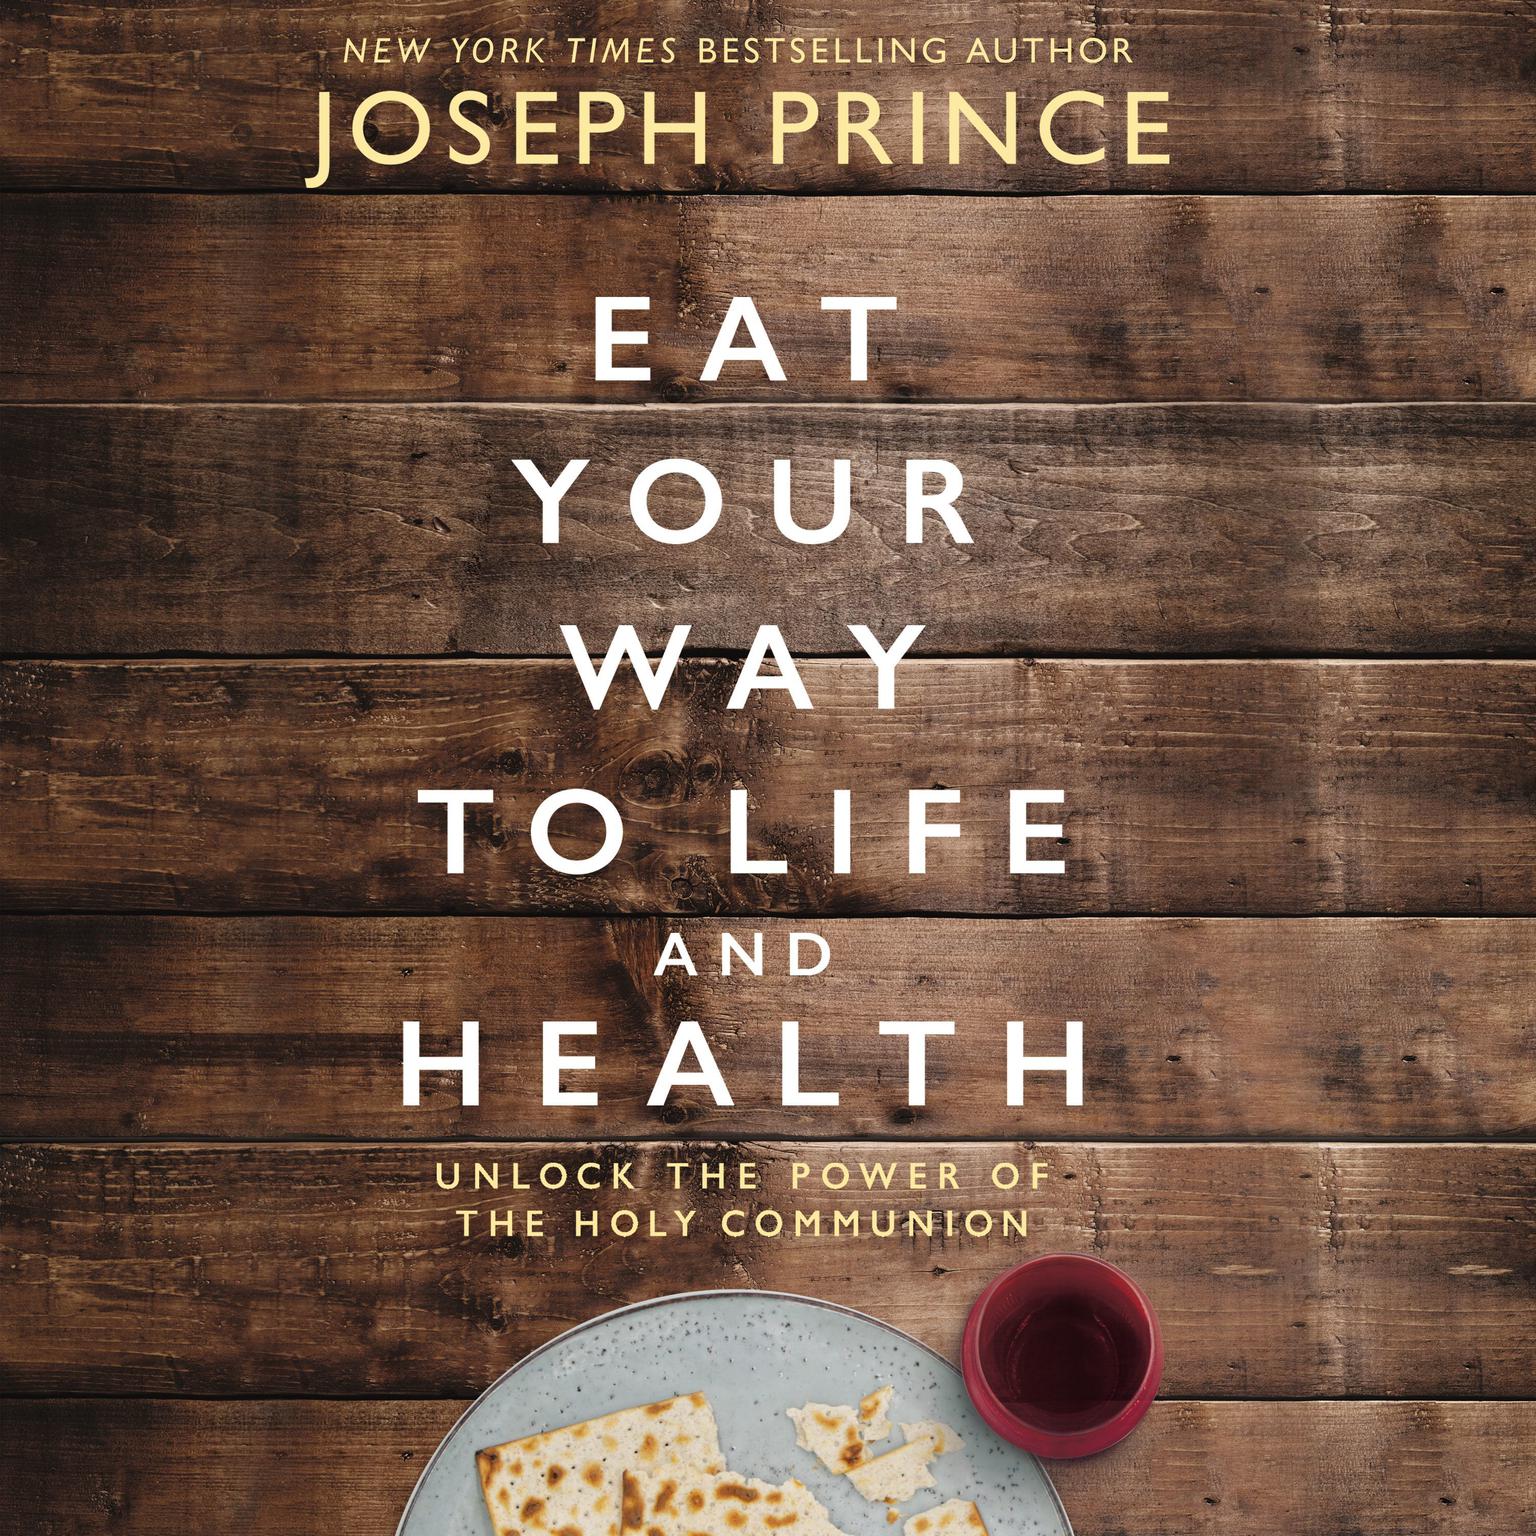 Eat Your Way to Life and Health: Unlock the Power of the Holy Communion Audiobook, by Joseph Prince